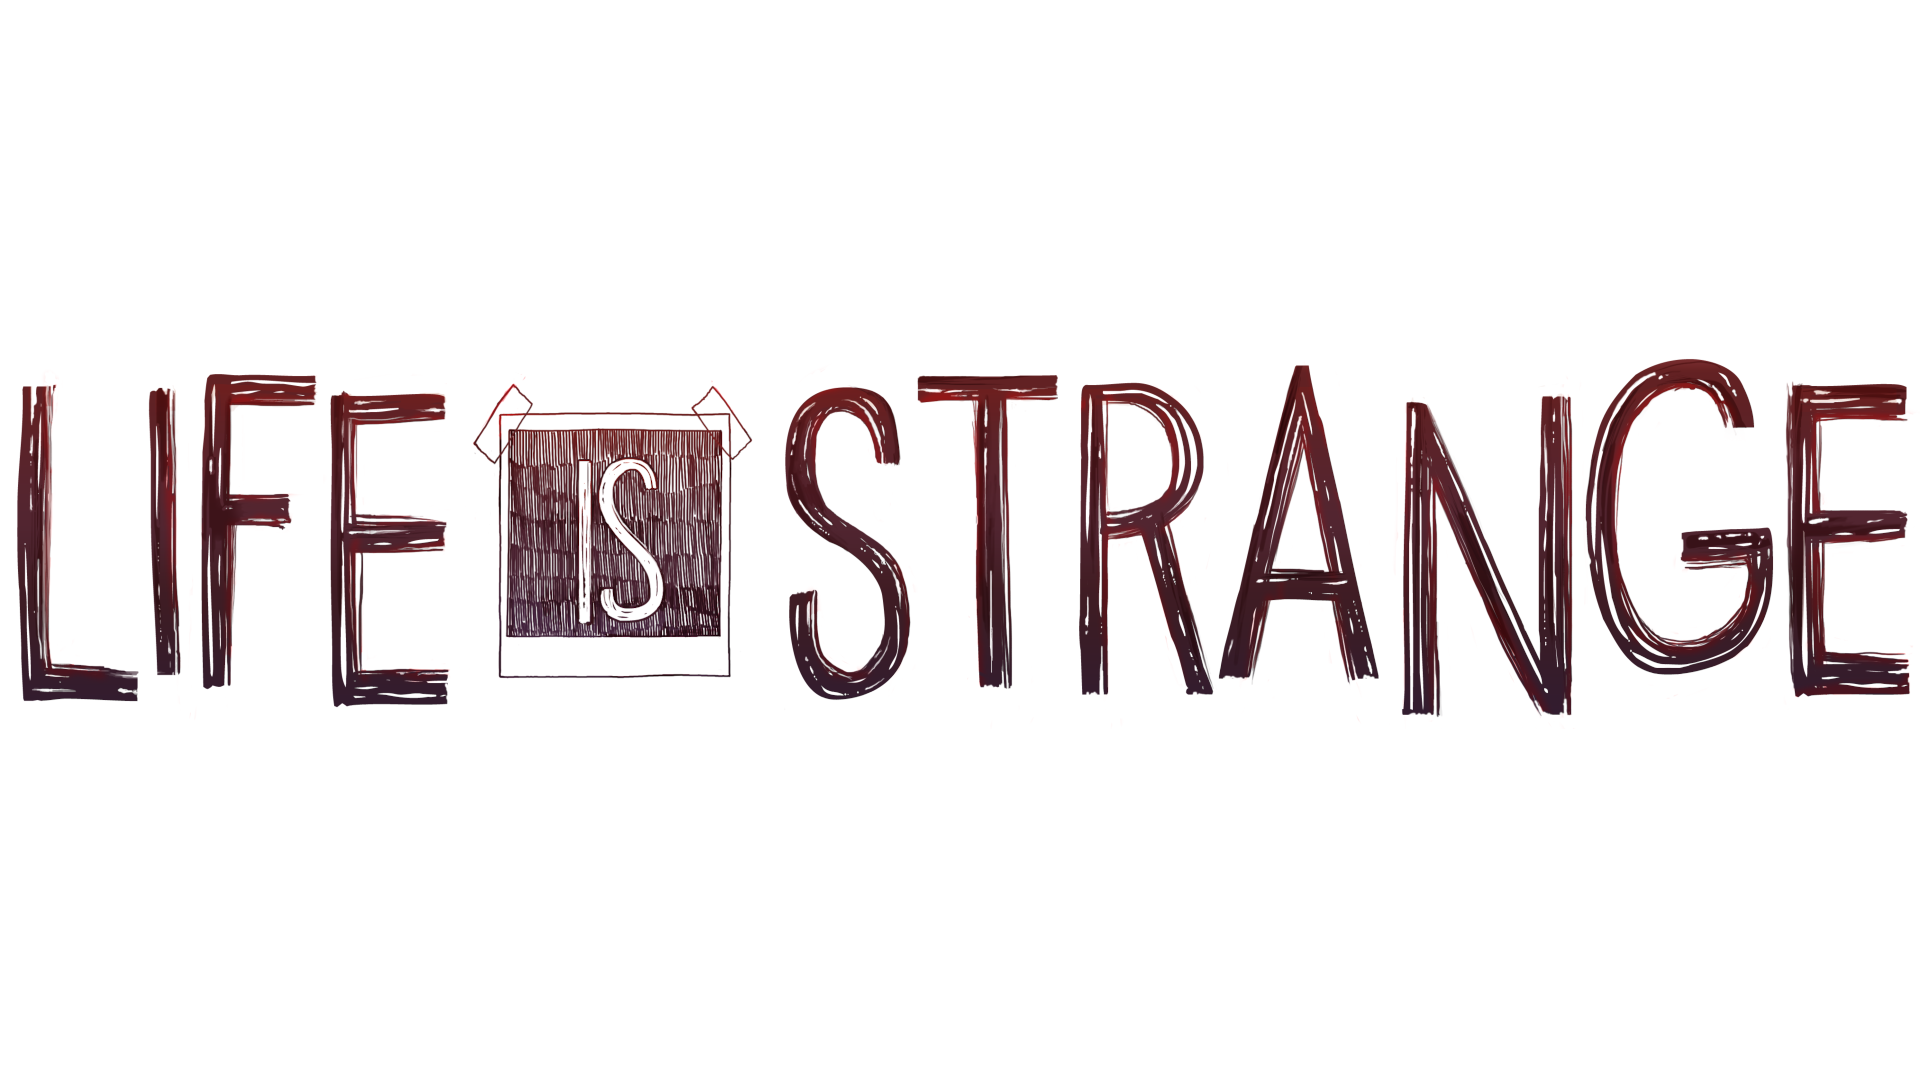 Life is Strange лого. Life is Strange 1 лого. Strange надпись. Life is Strange logo PNG. Titles are life